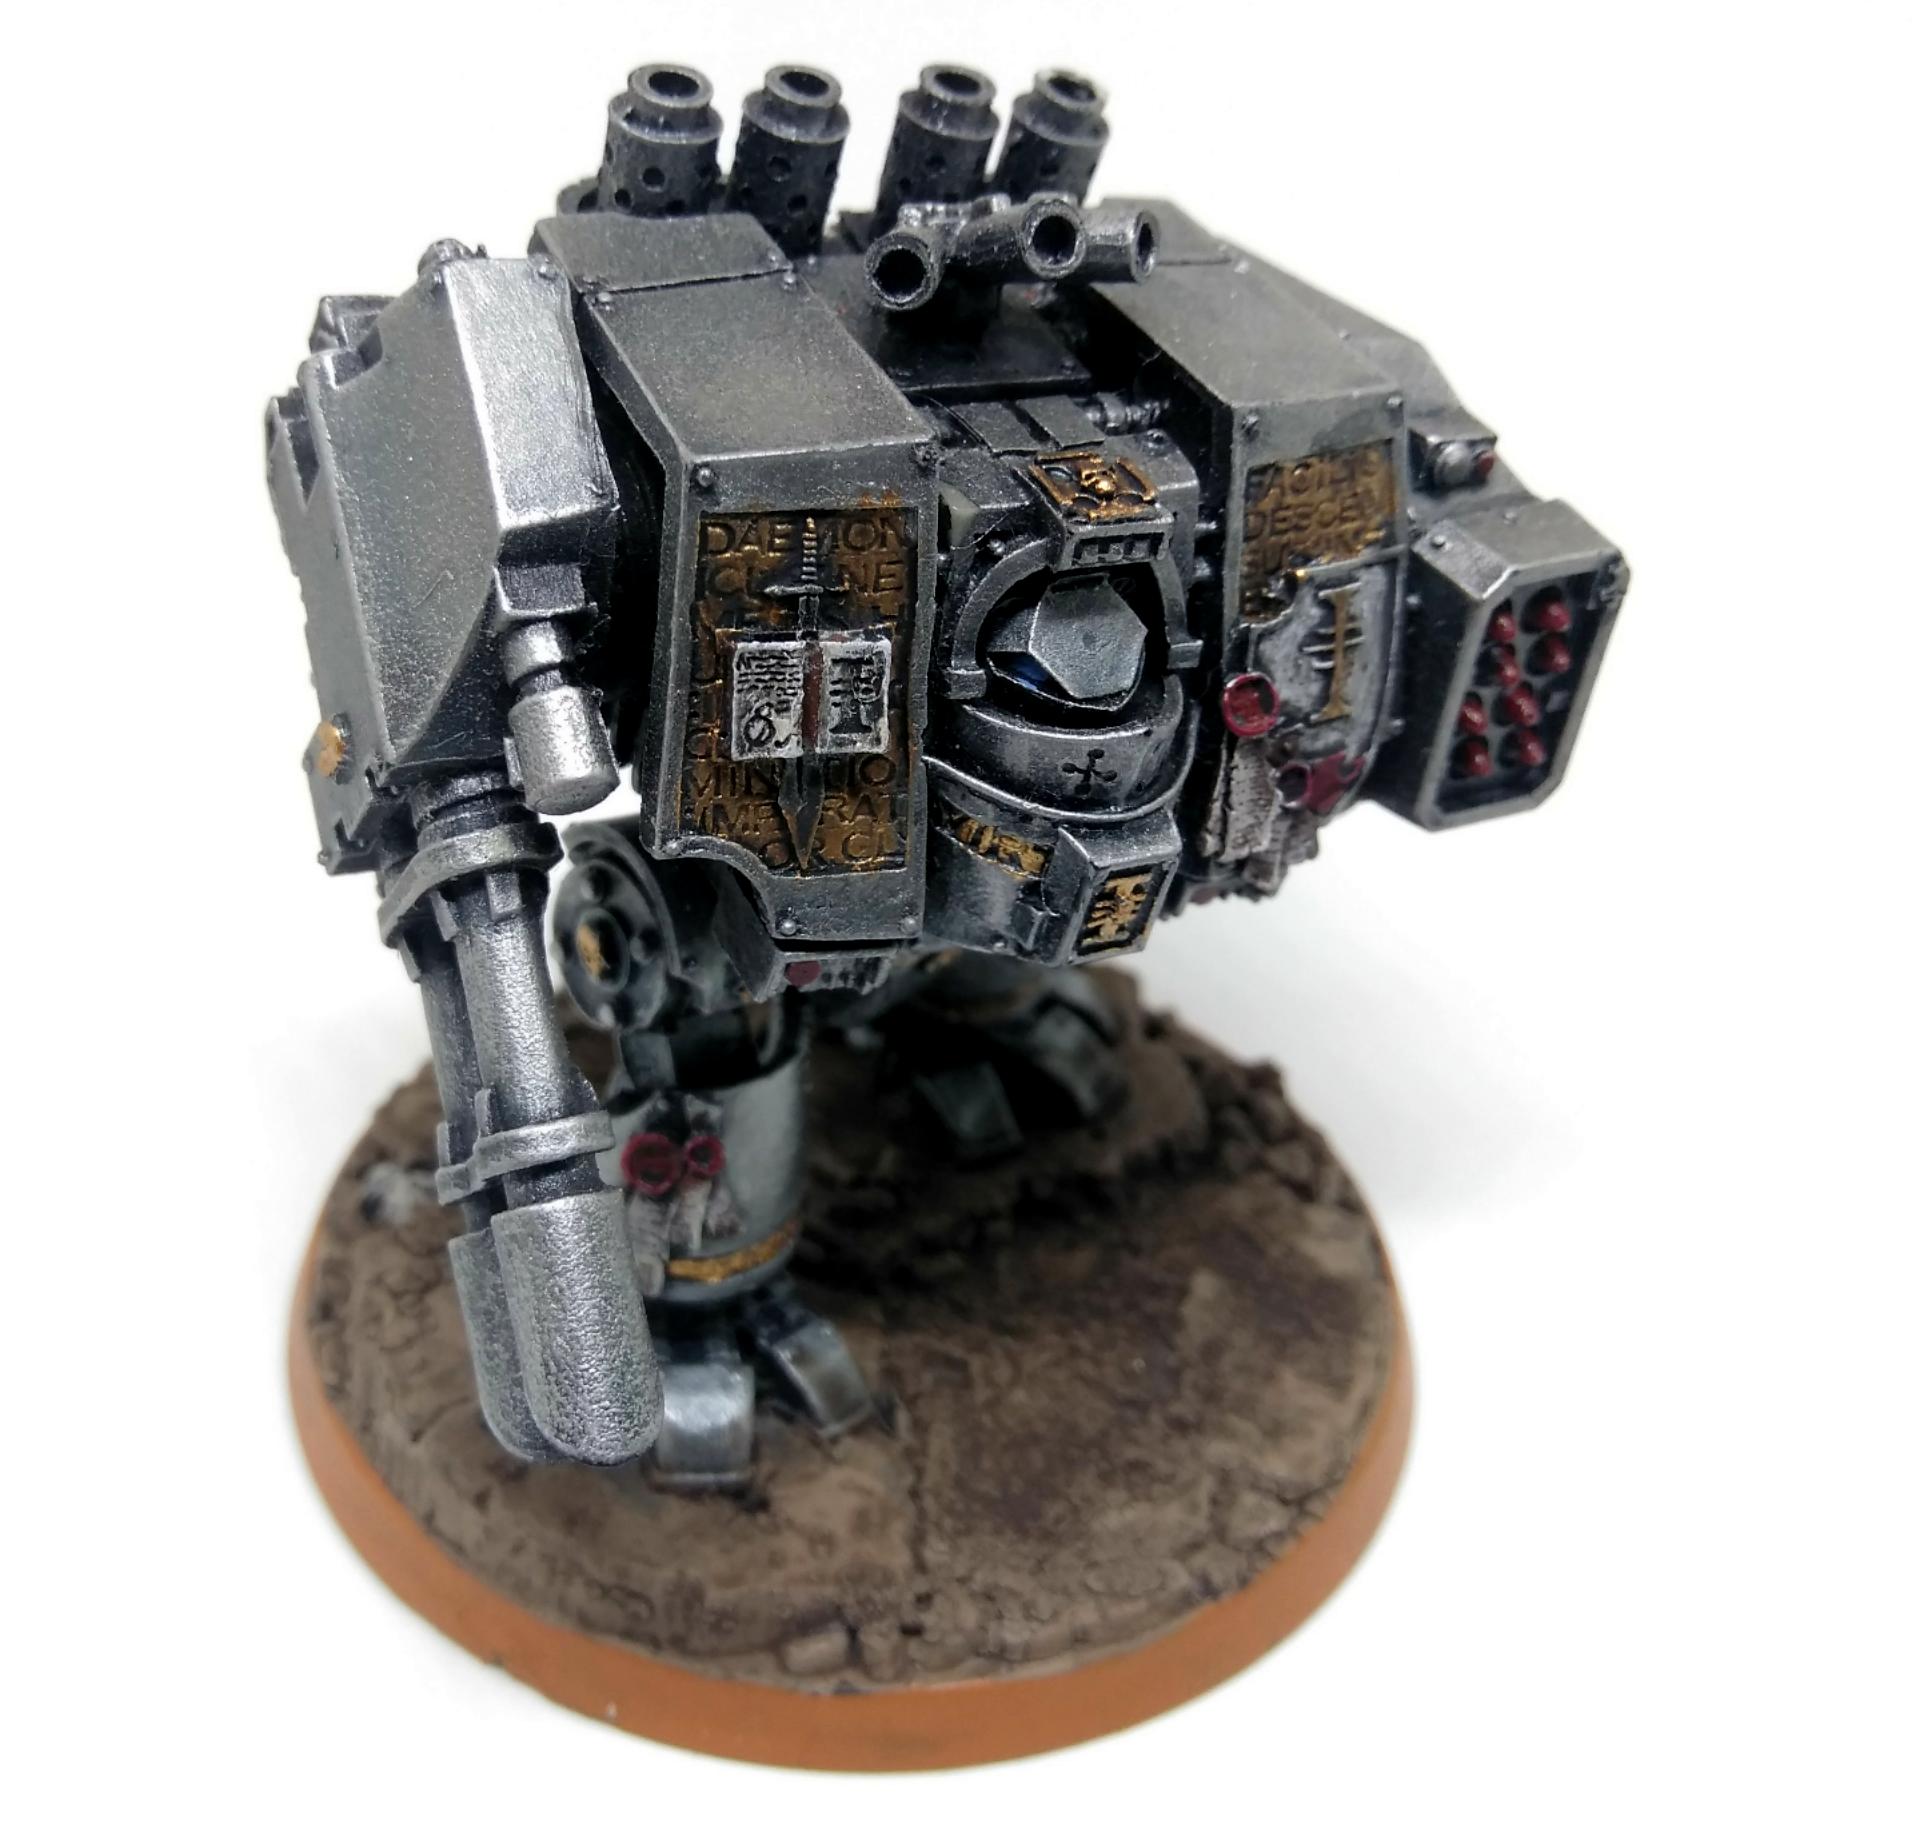 Dreadnought, Grey Knights, Space Marines